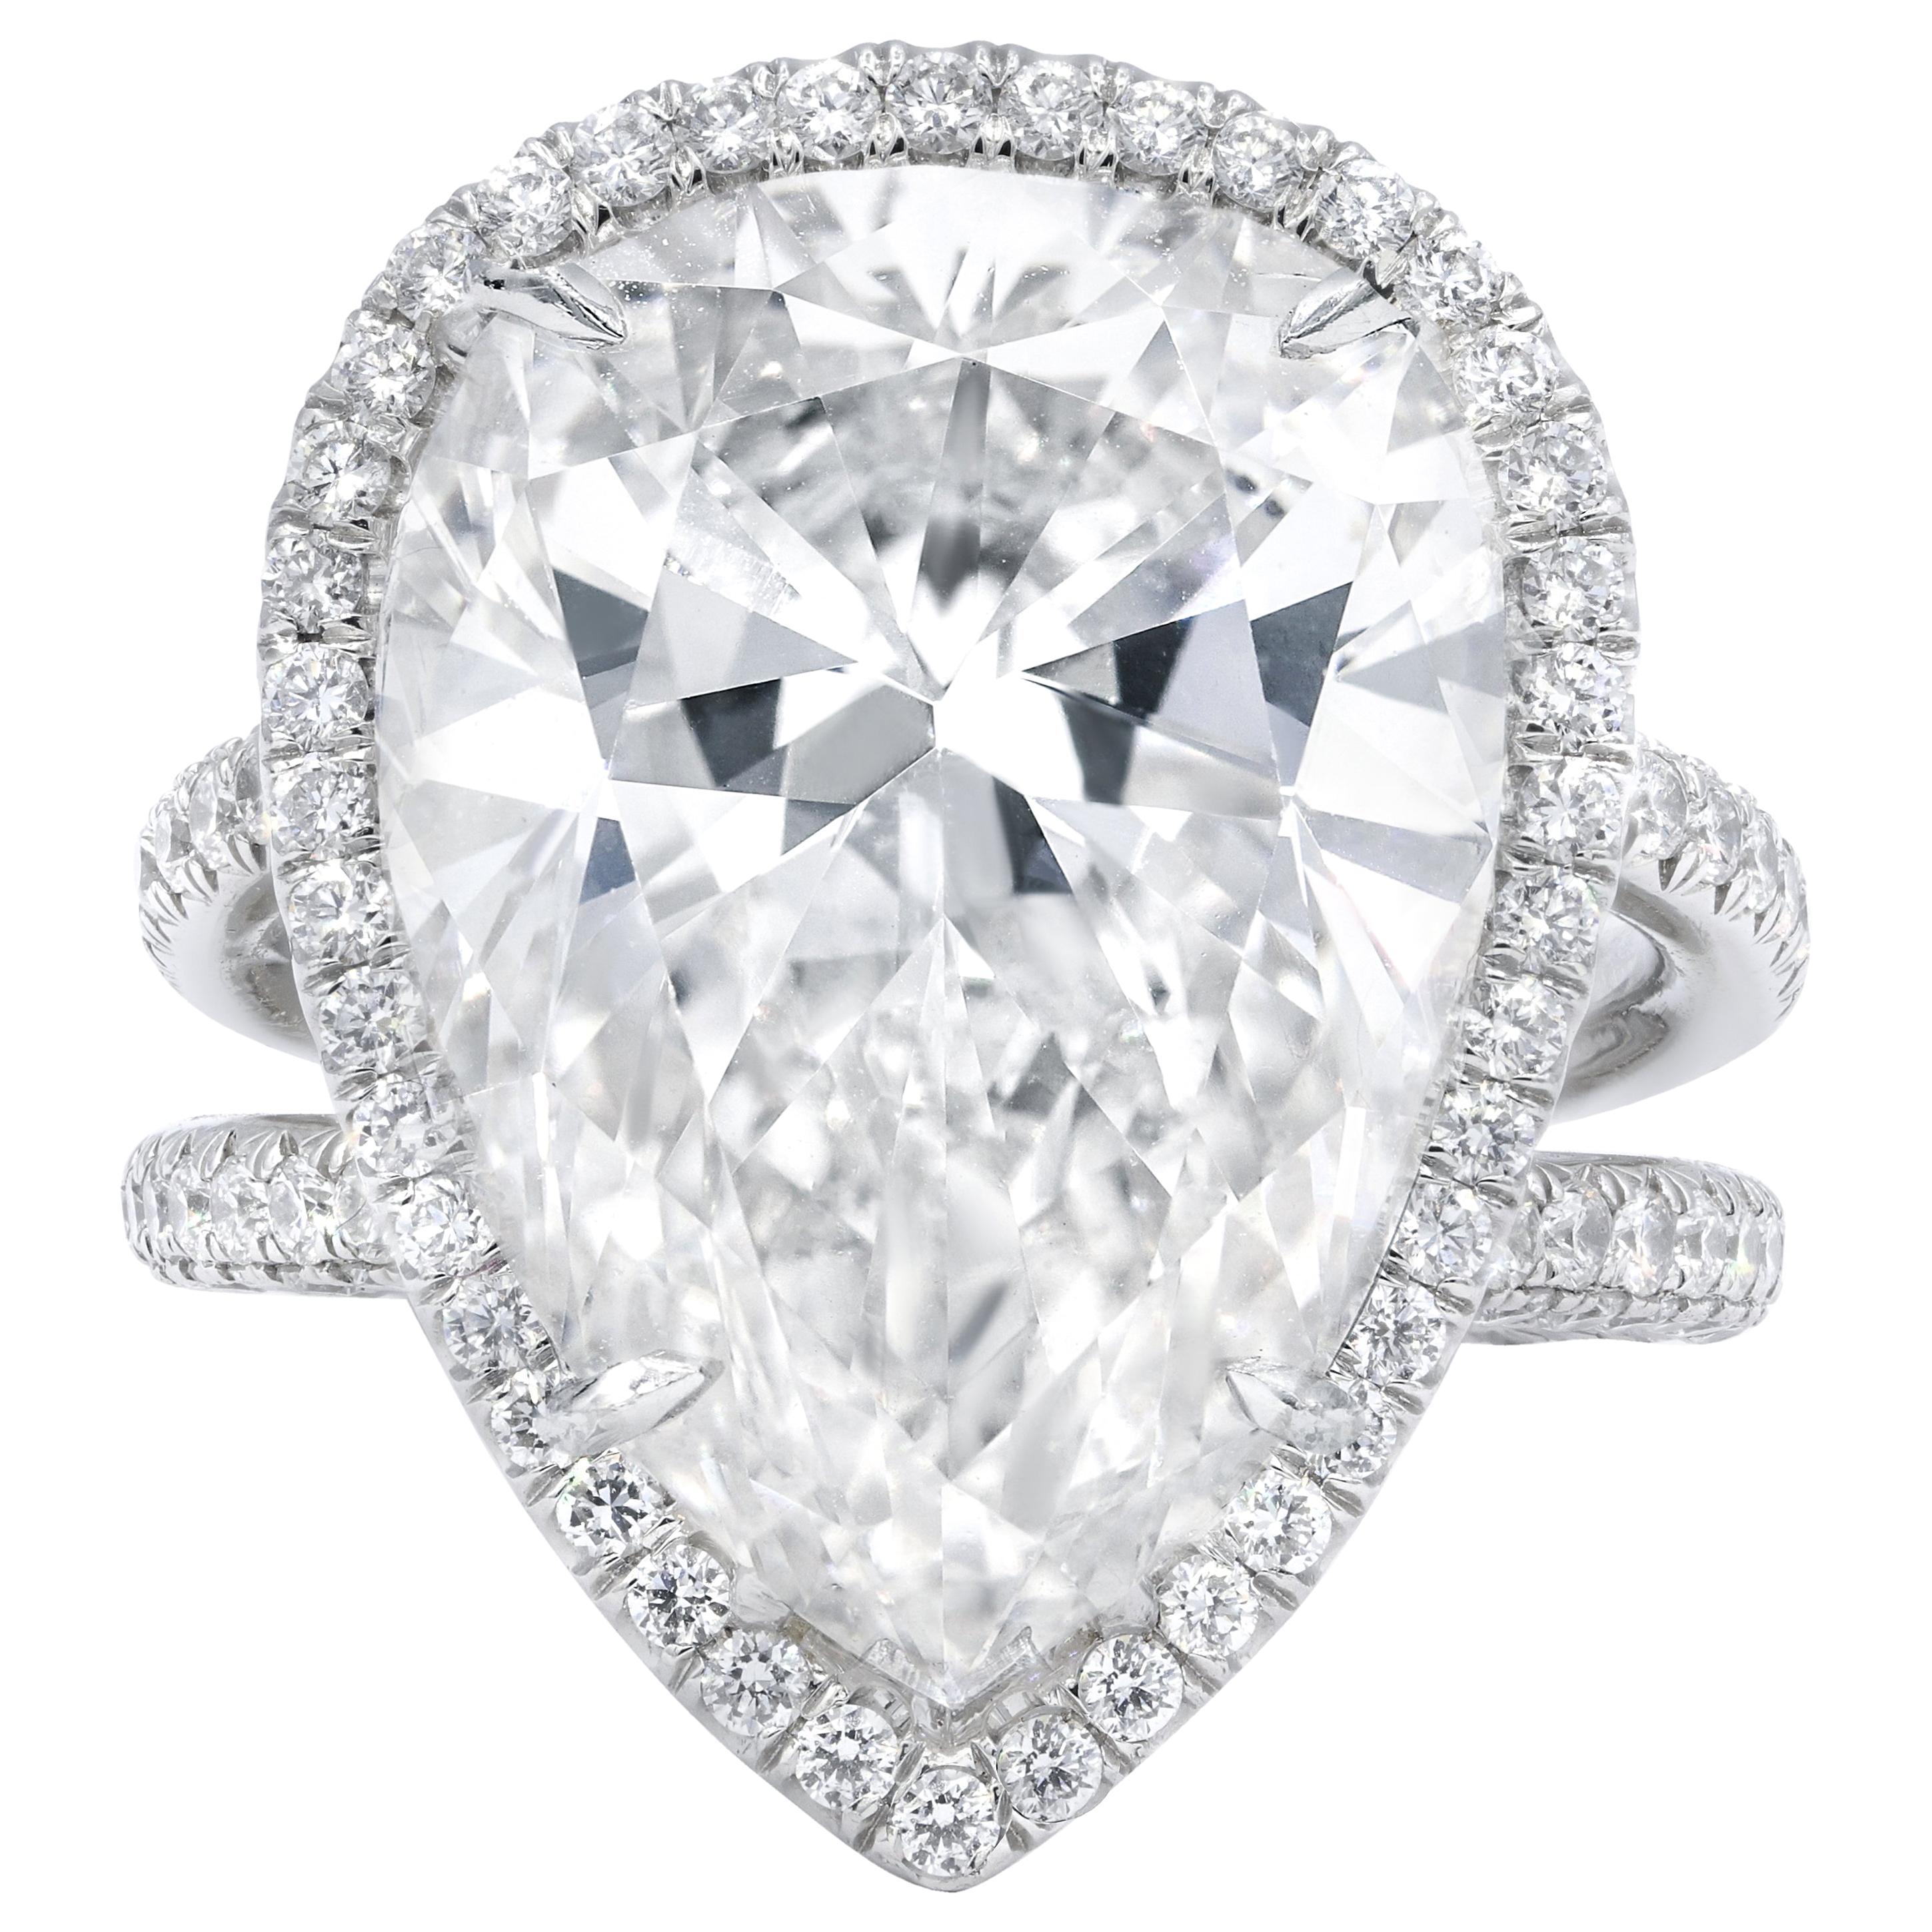 Diana M. 15.01 Carat F-SI2 Pear Shaped Diamond Ring For Sale